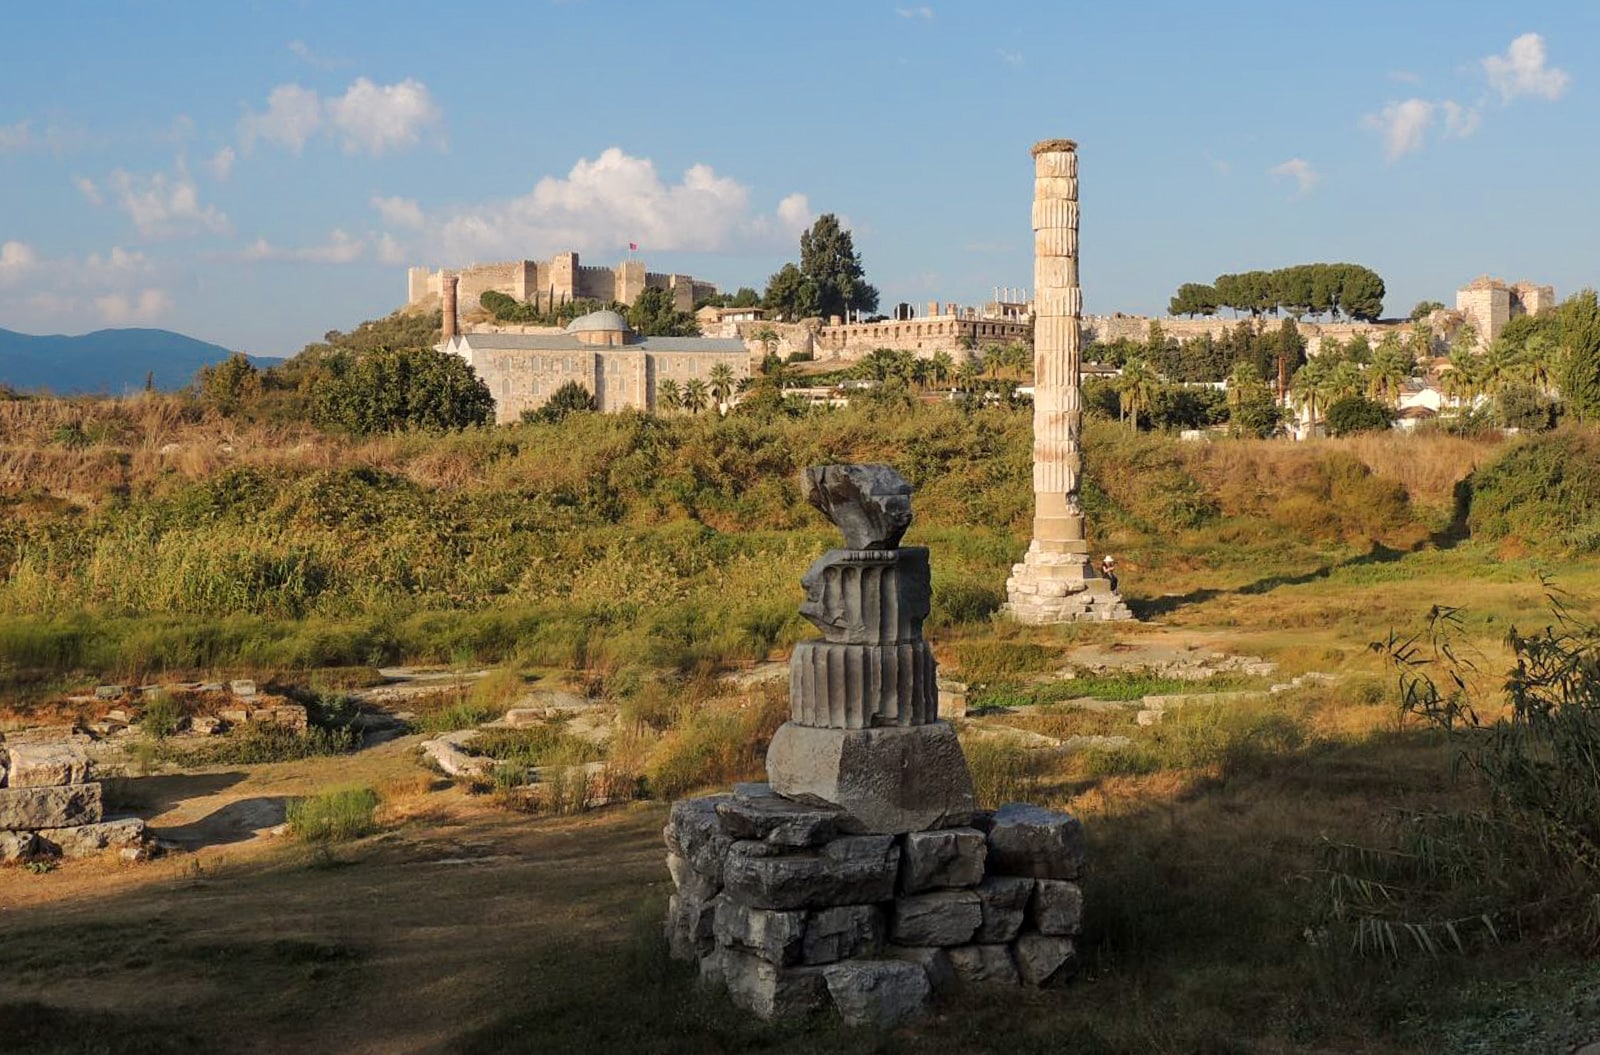 A rebuilt column of the Temple of Artemis to give an idea of scale. Photo by Anita Gould.